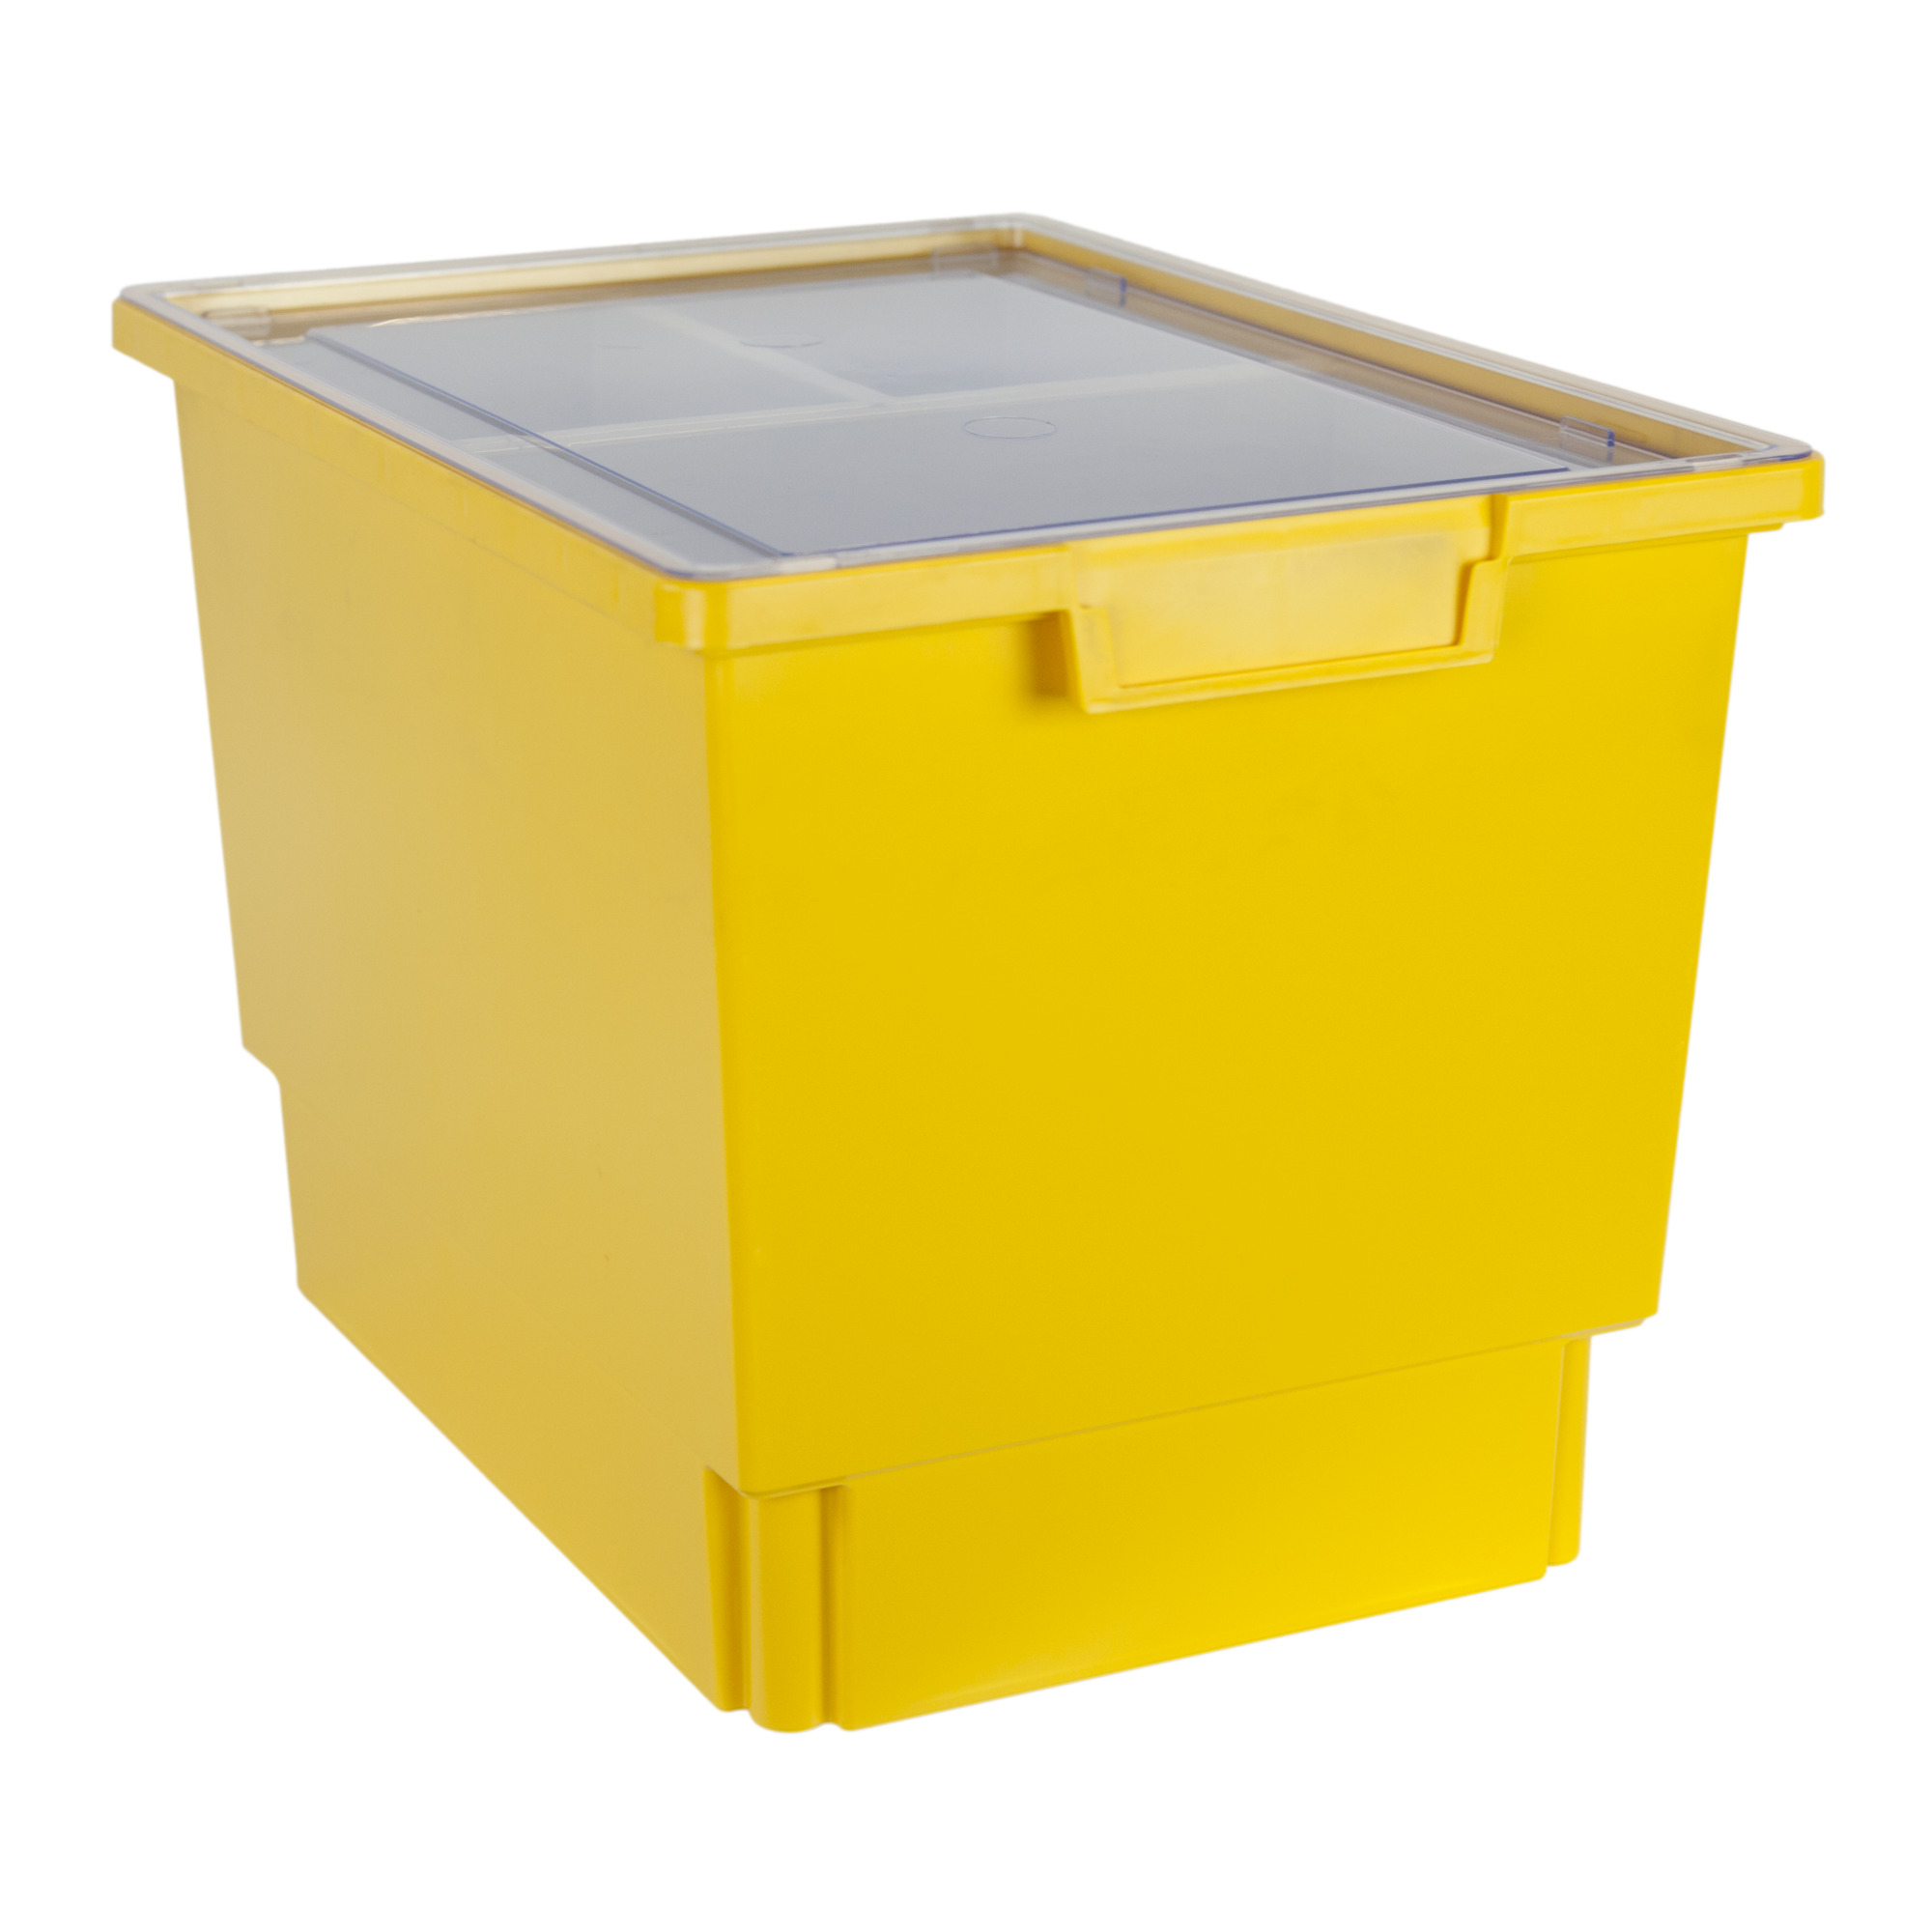 StorWerks, Slim Line 12Inch Tray Kit (3 x Inserts) Yellow-3PK, Included (qty.) 1, Material Plastic, Height 12 in, Model - Certwood CE1954PY-NK0004-1